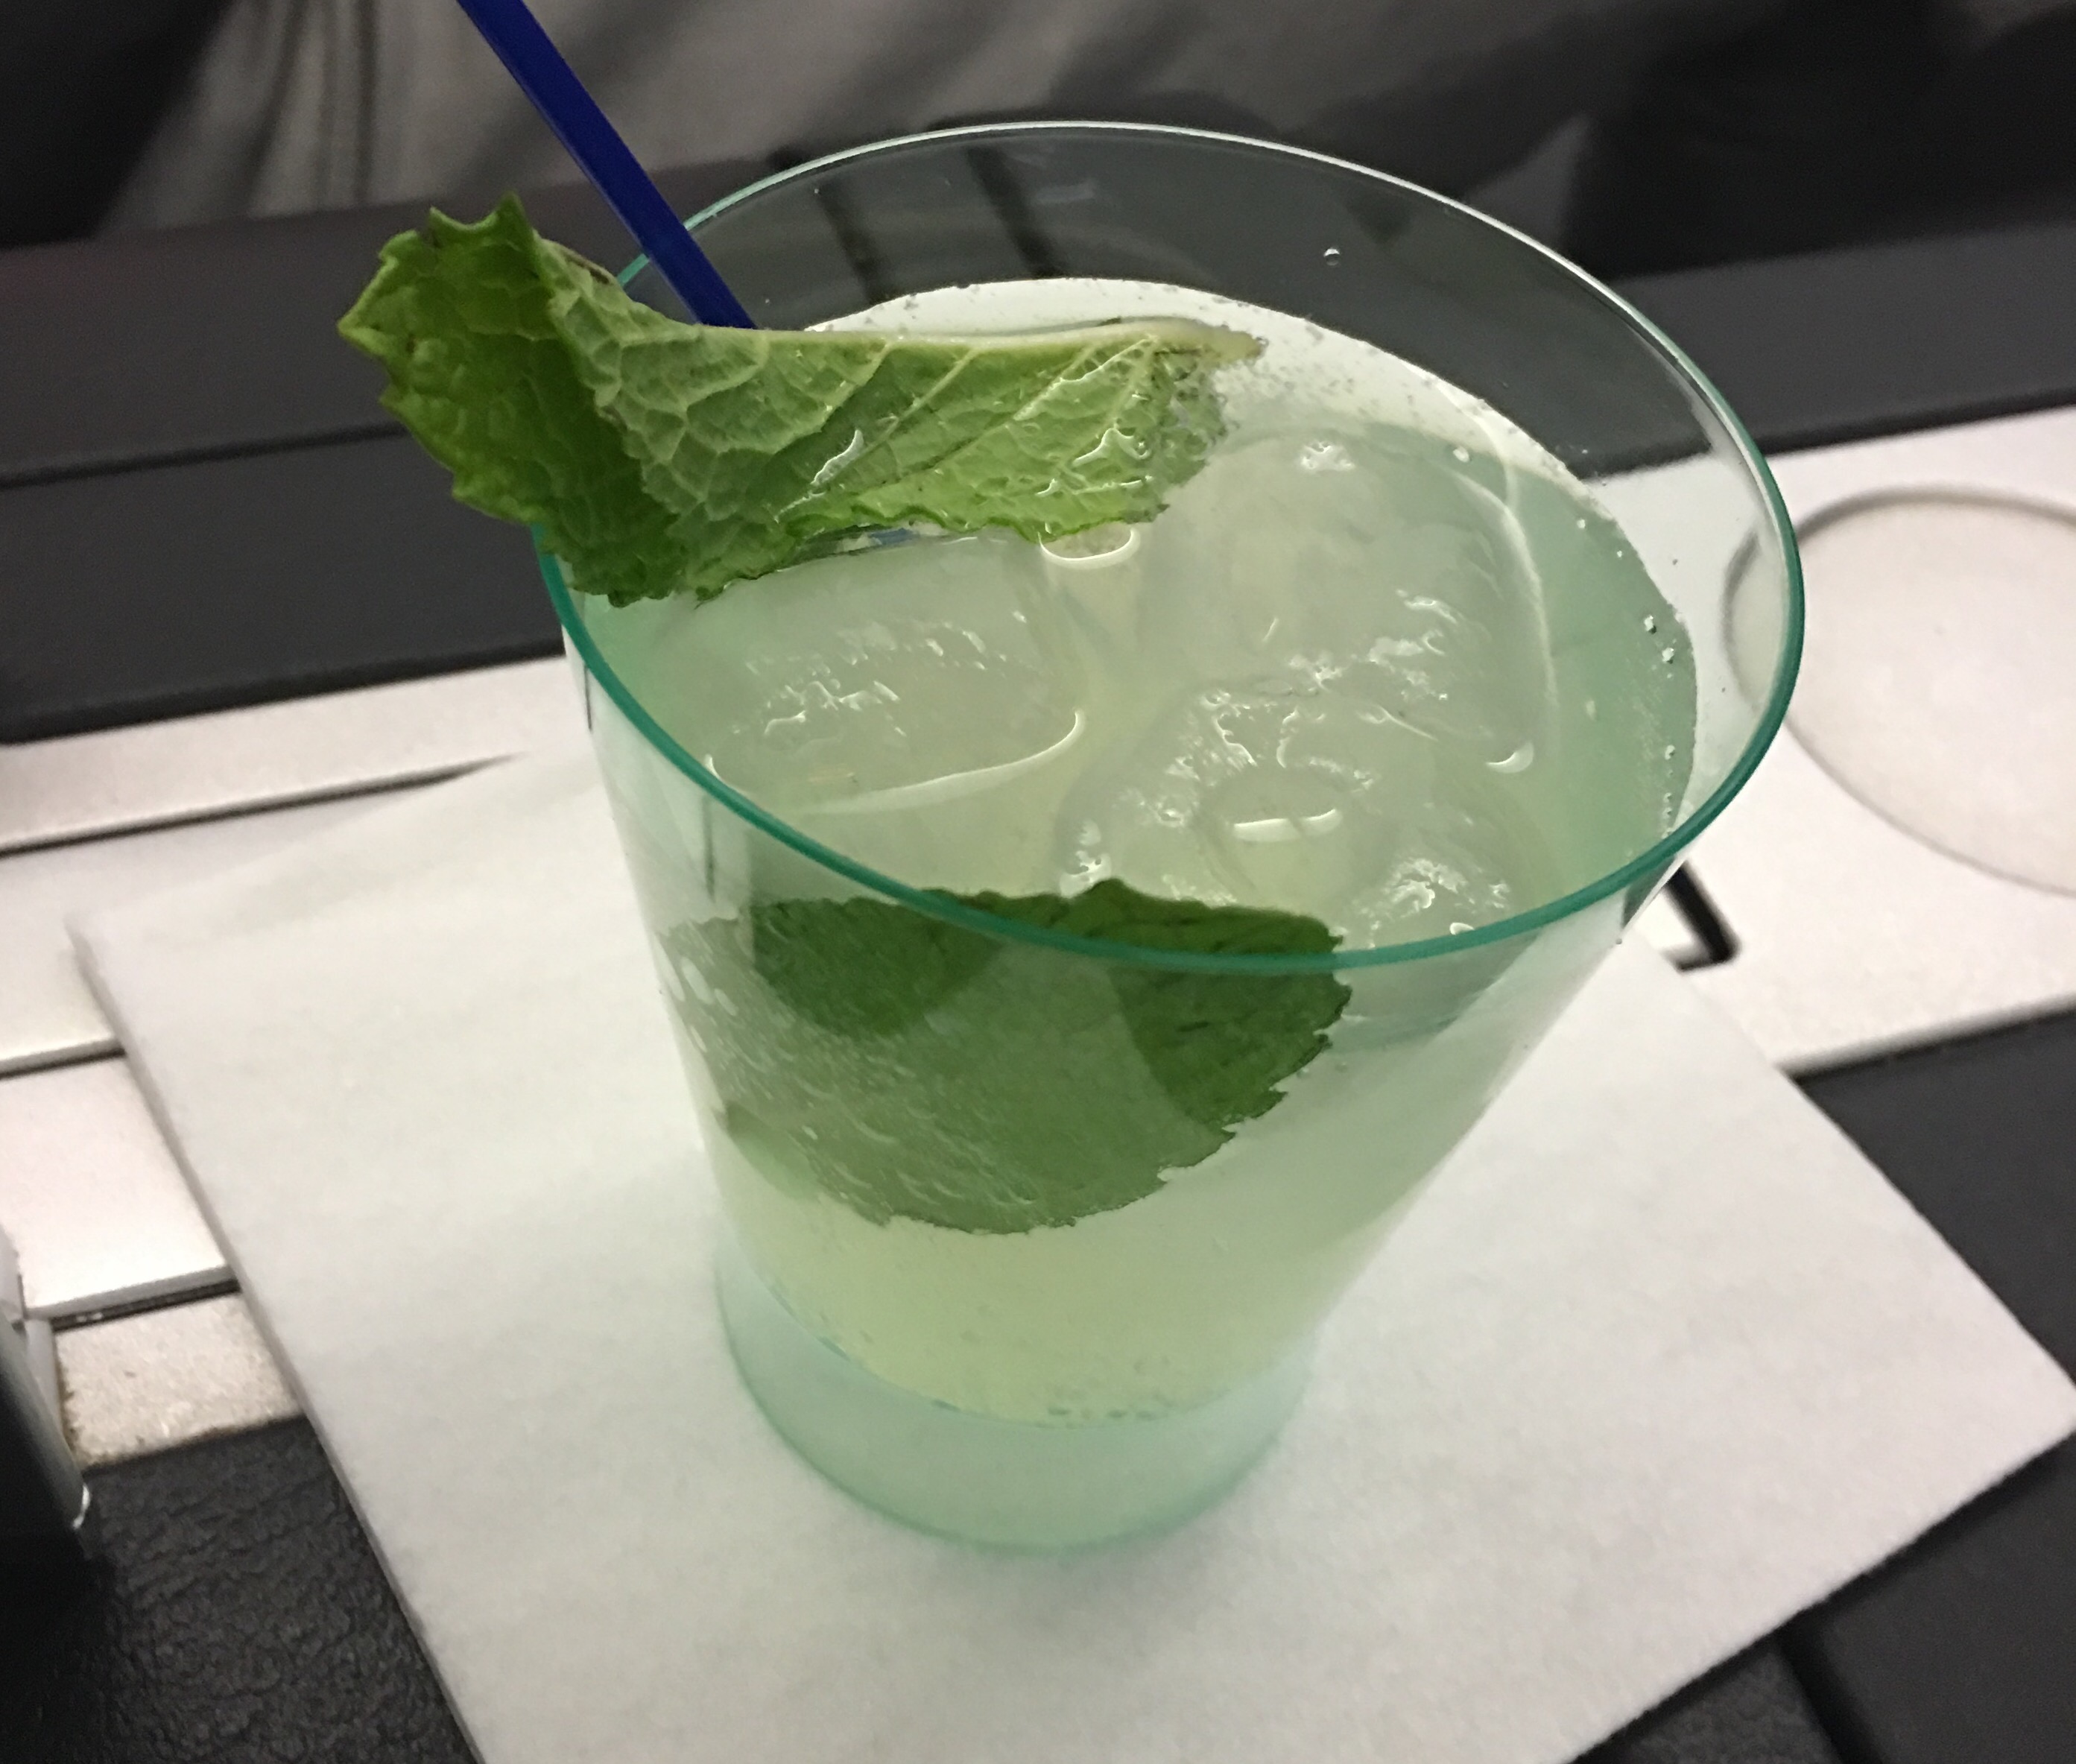 The signature "RefreshMint" drink